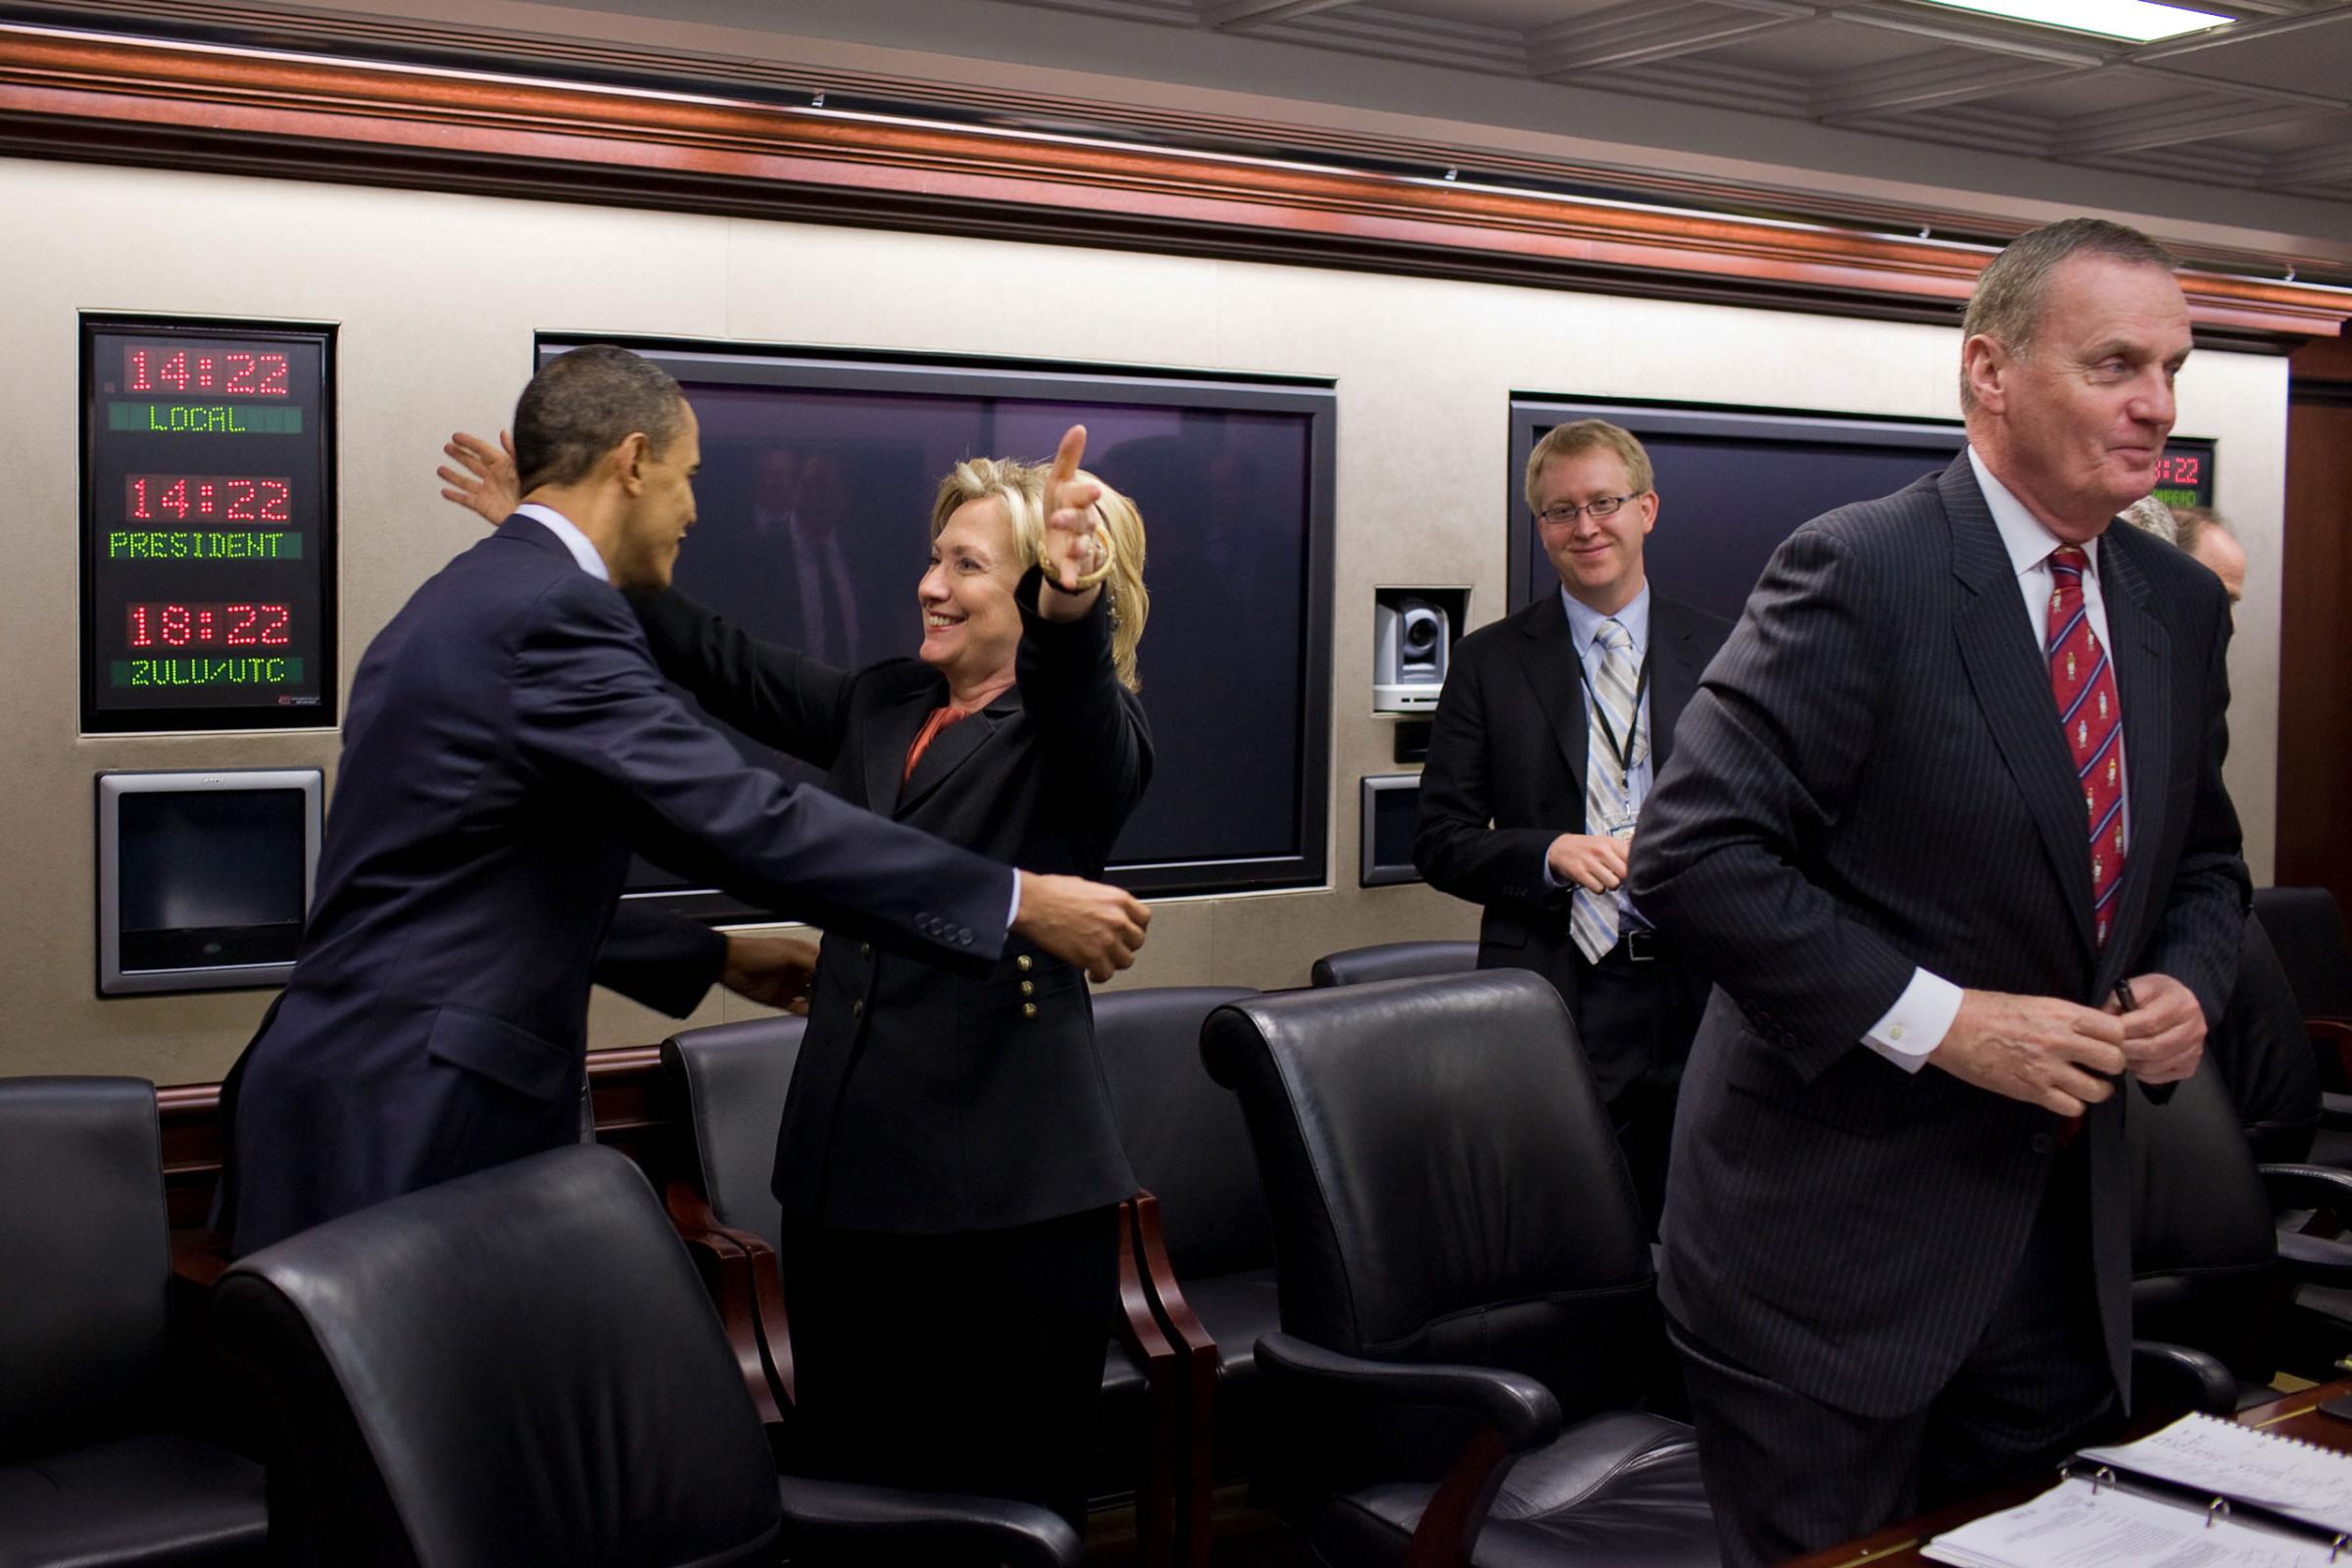 Secretary of State Hillary Rodham Clinton congratulates President Barack Obama on the House vote to pass health care reform, prior to a meeting in the Situation Room of the White House, March 22, 2010.